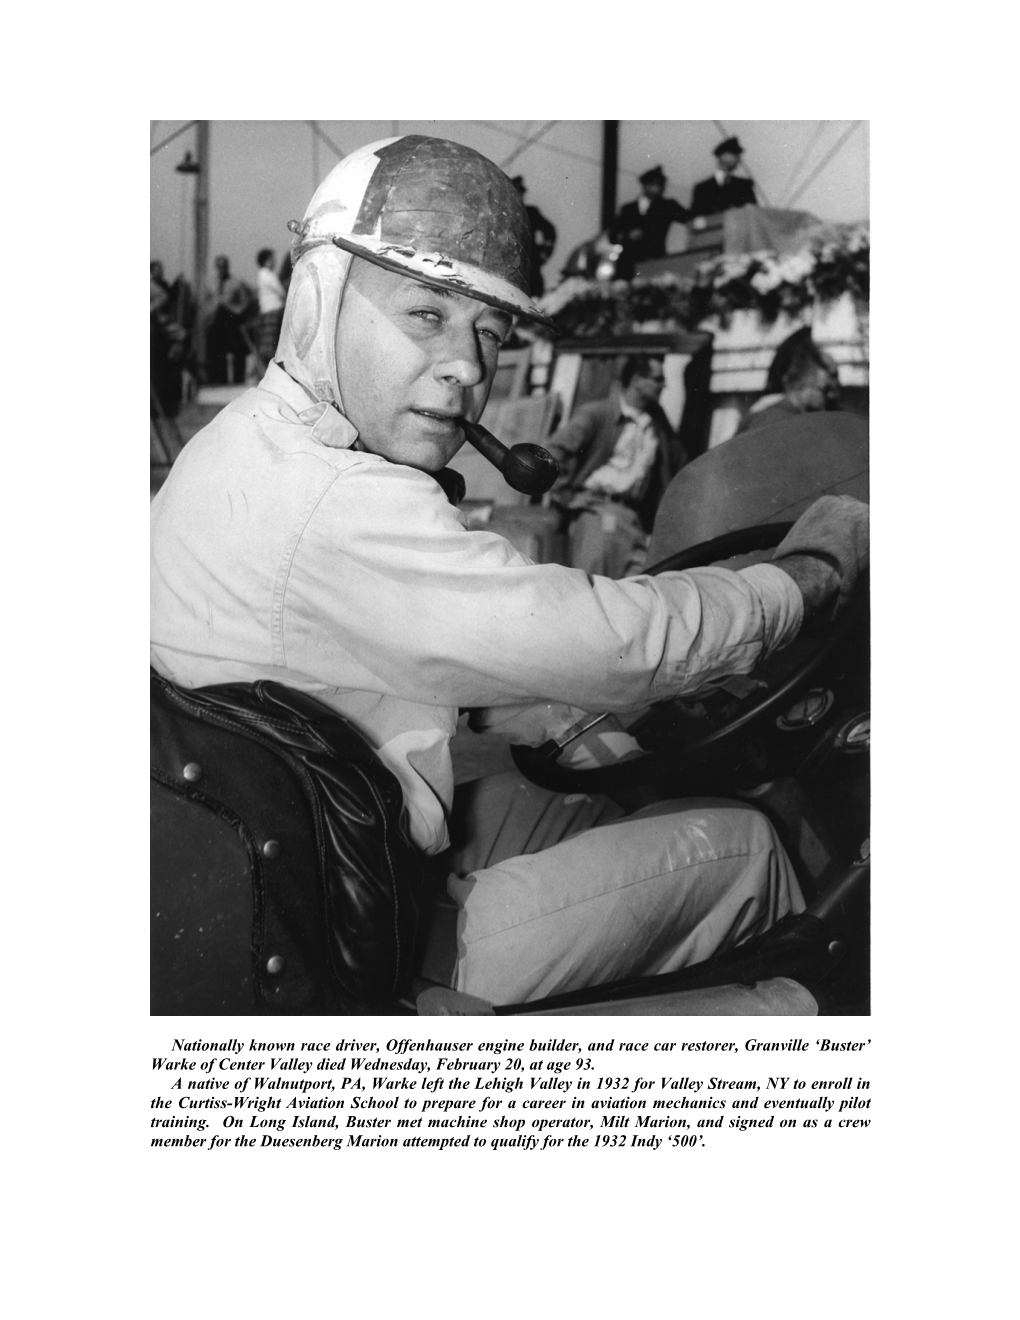 Nationally Known Race Driver, Offenhauser Engine Builder, and Race Car Restorer, Granville ‘Buster’ Warke of Center Valley Died Wednesday, February 20, at Age 93